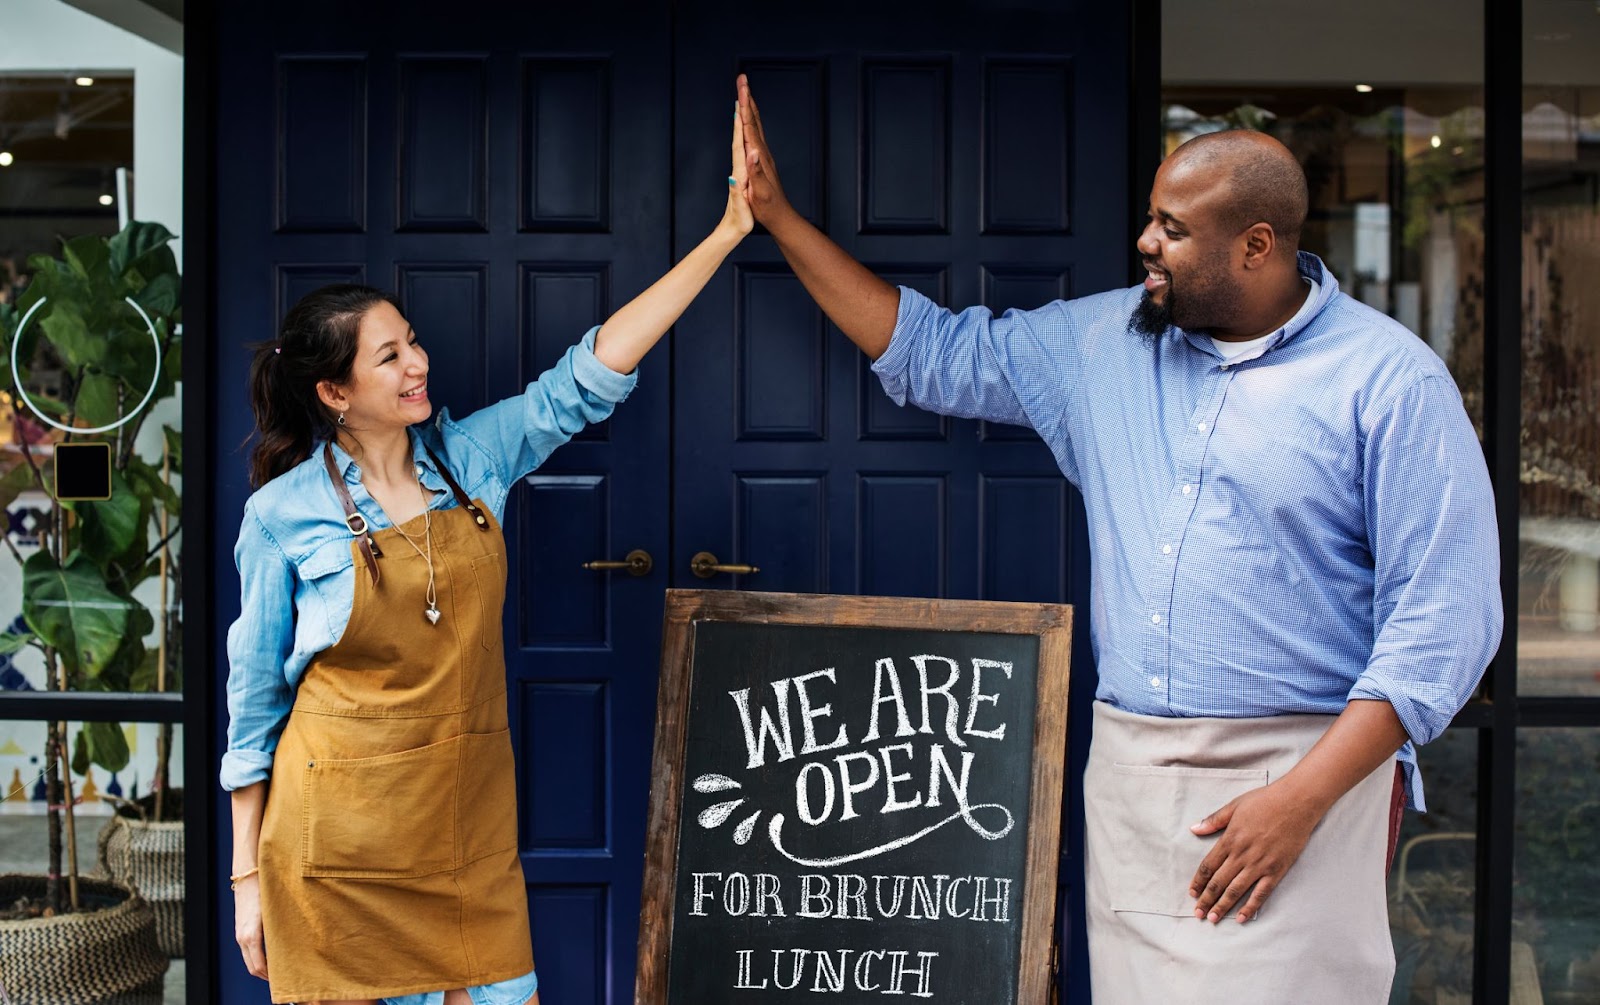 Two people high-fiving each other in front of a restaurant